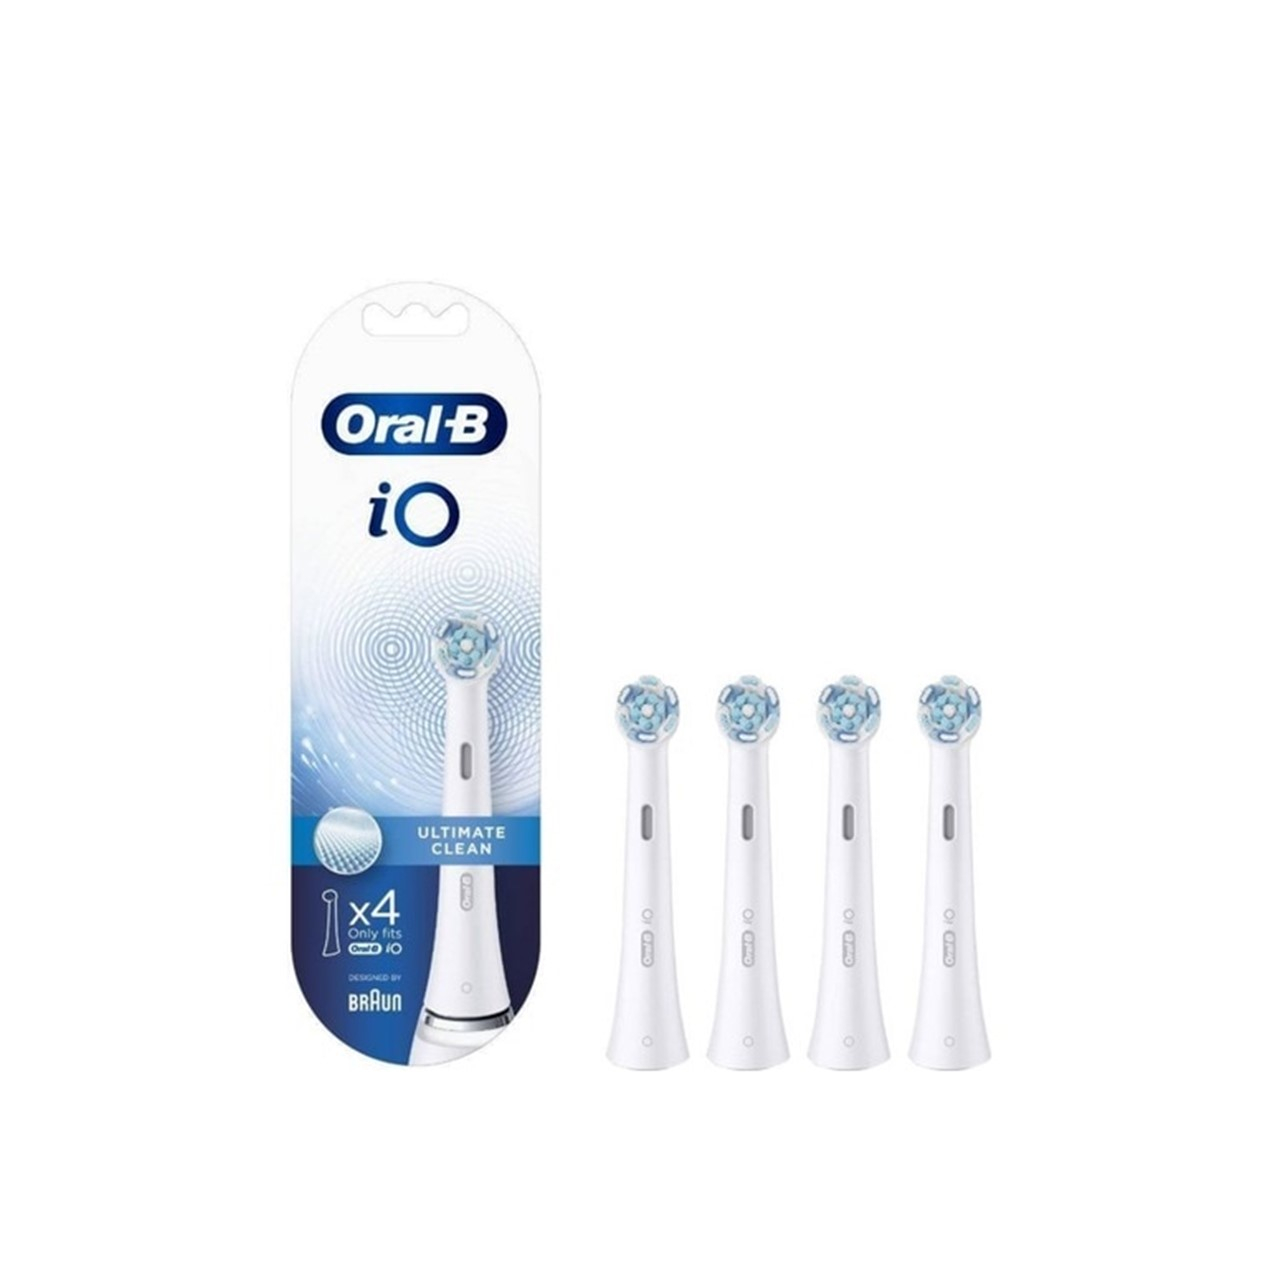 Oral-B iO Ultimate Clean Replacement Head Electric Toothbrush White x4